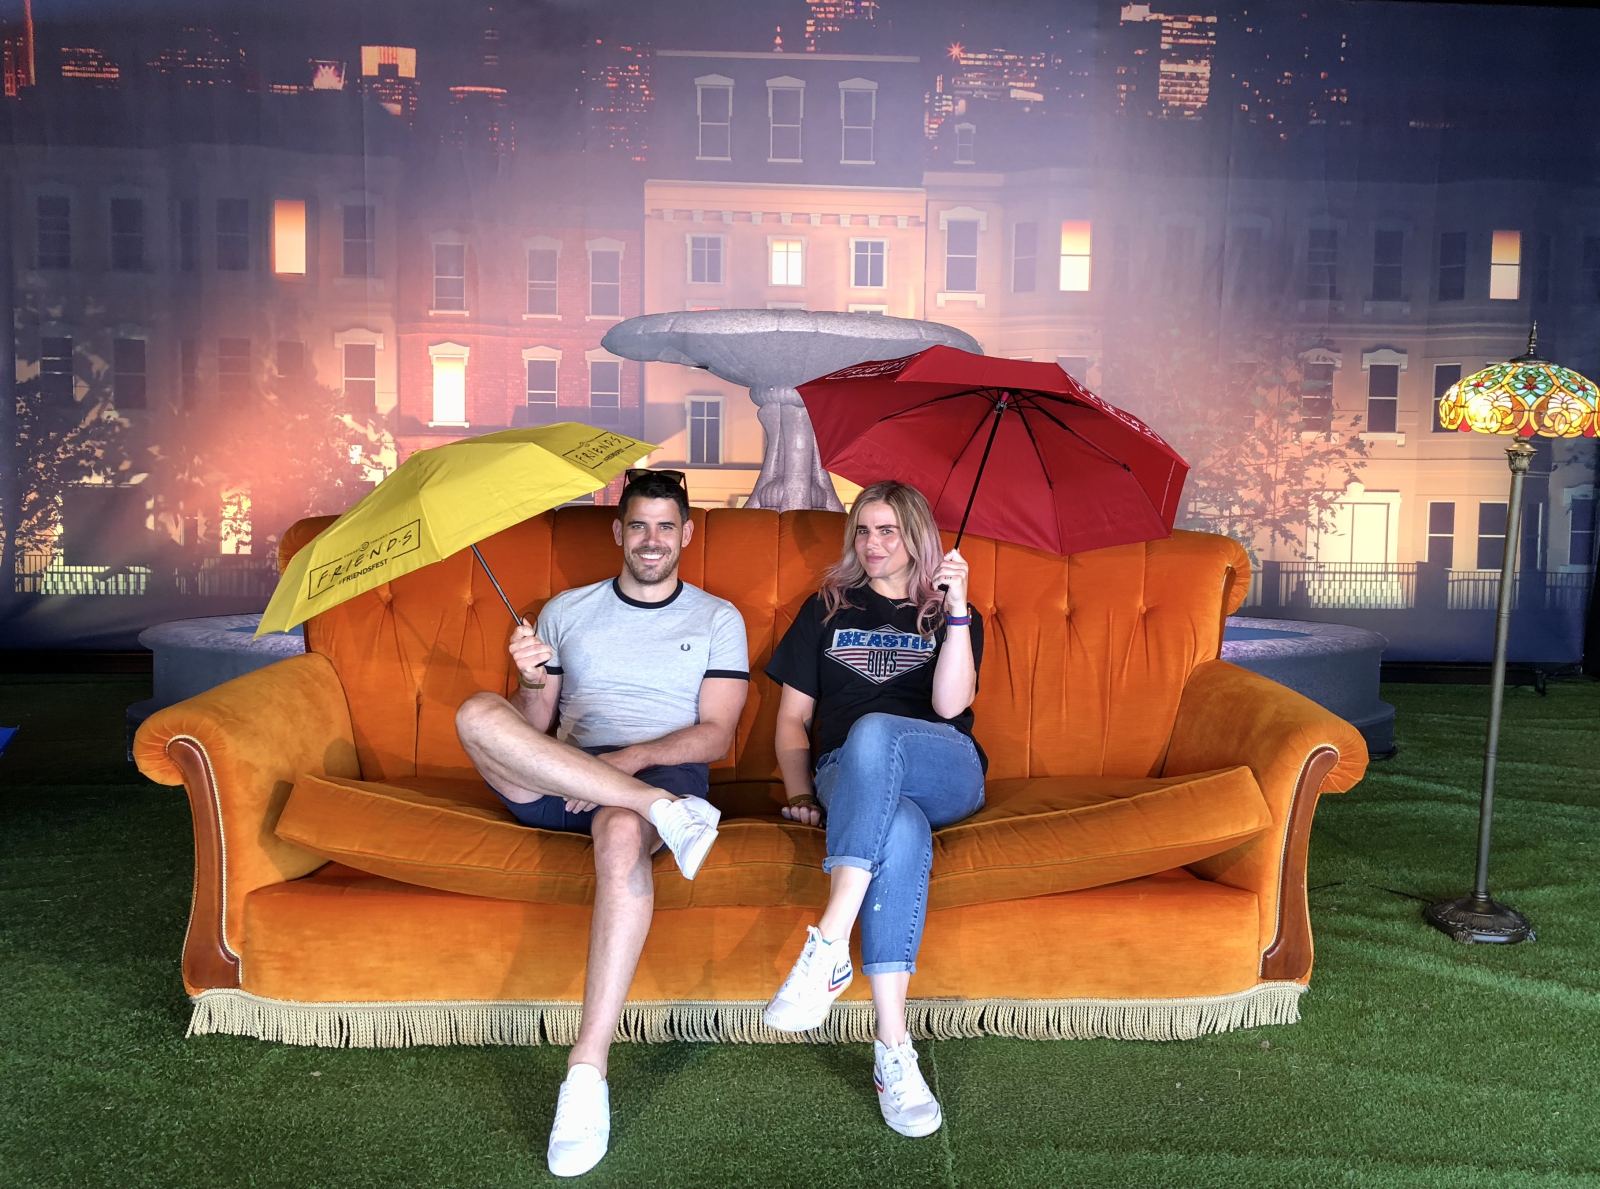 An image of Blogger Pixie Tenenbaum and her little brother at Comedy Central UK's Friends Fest 2018